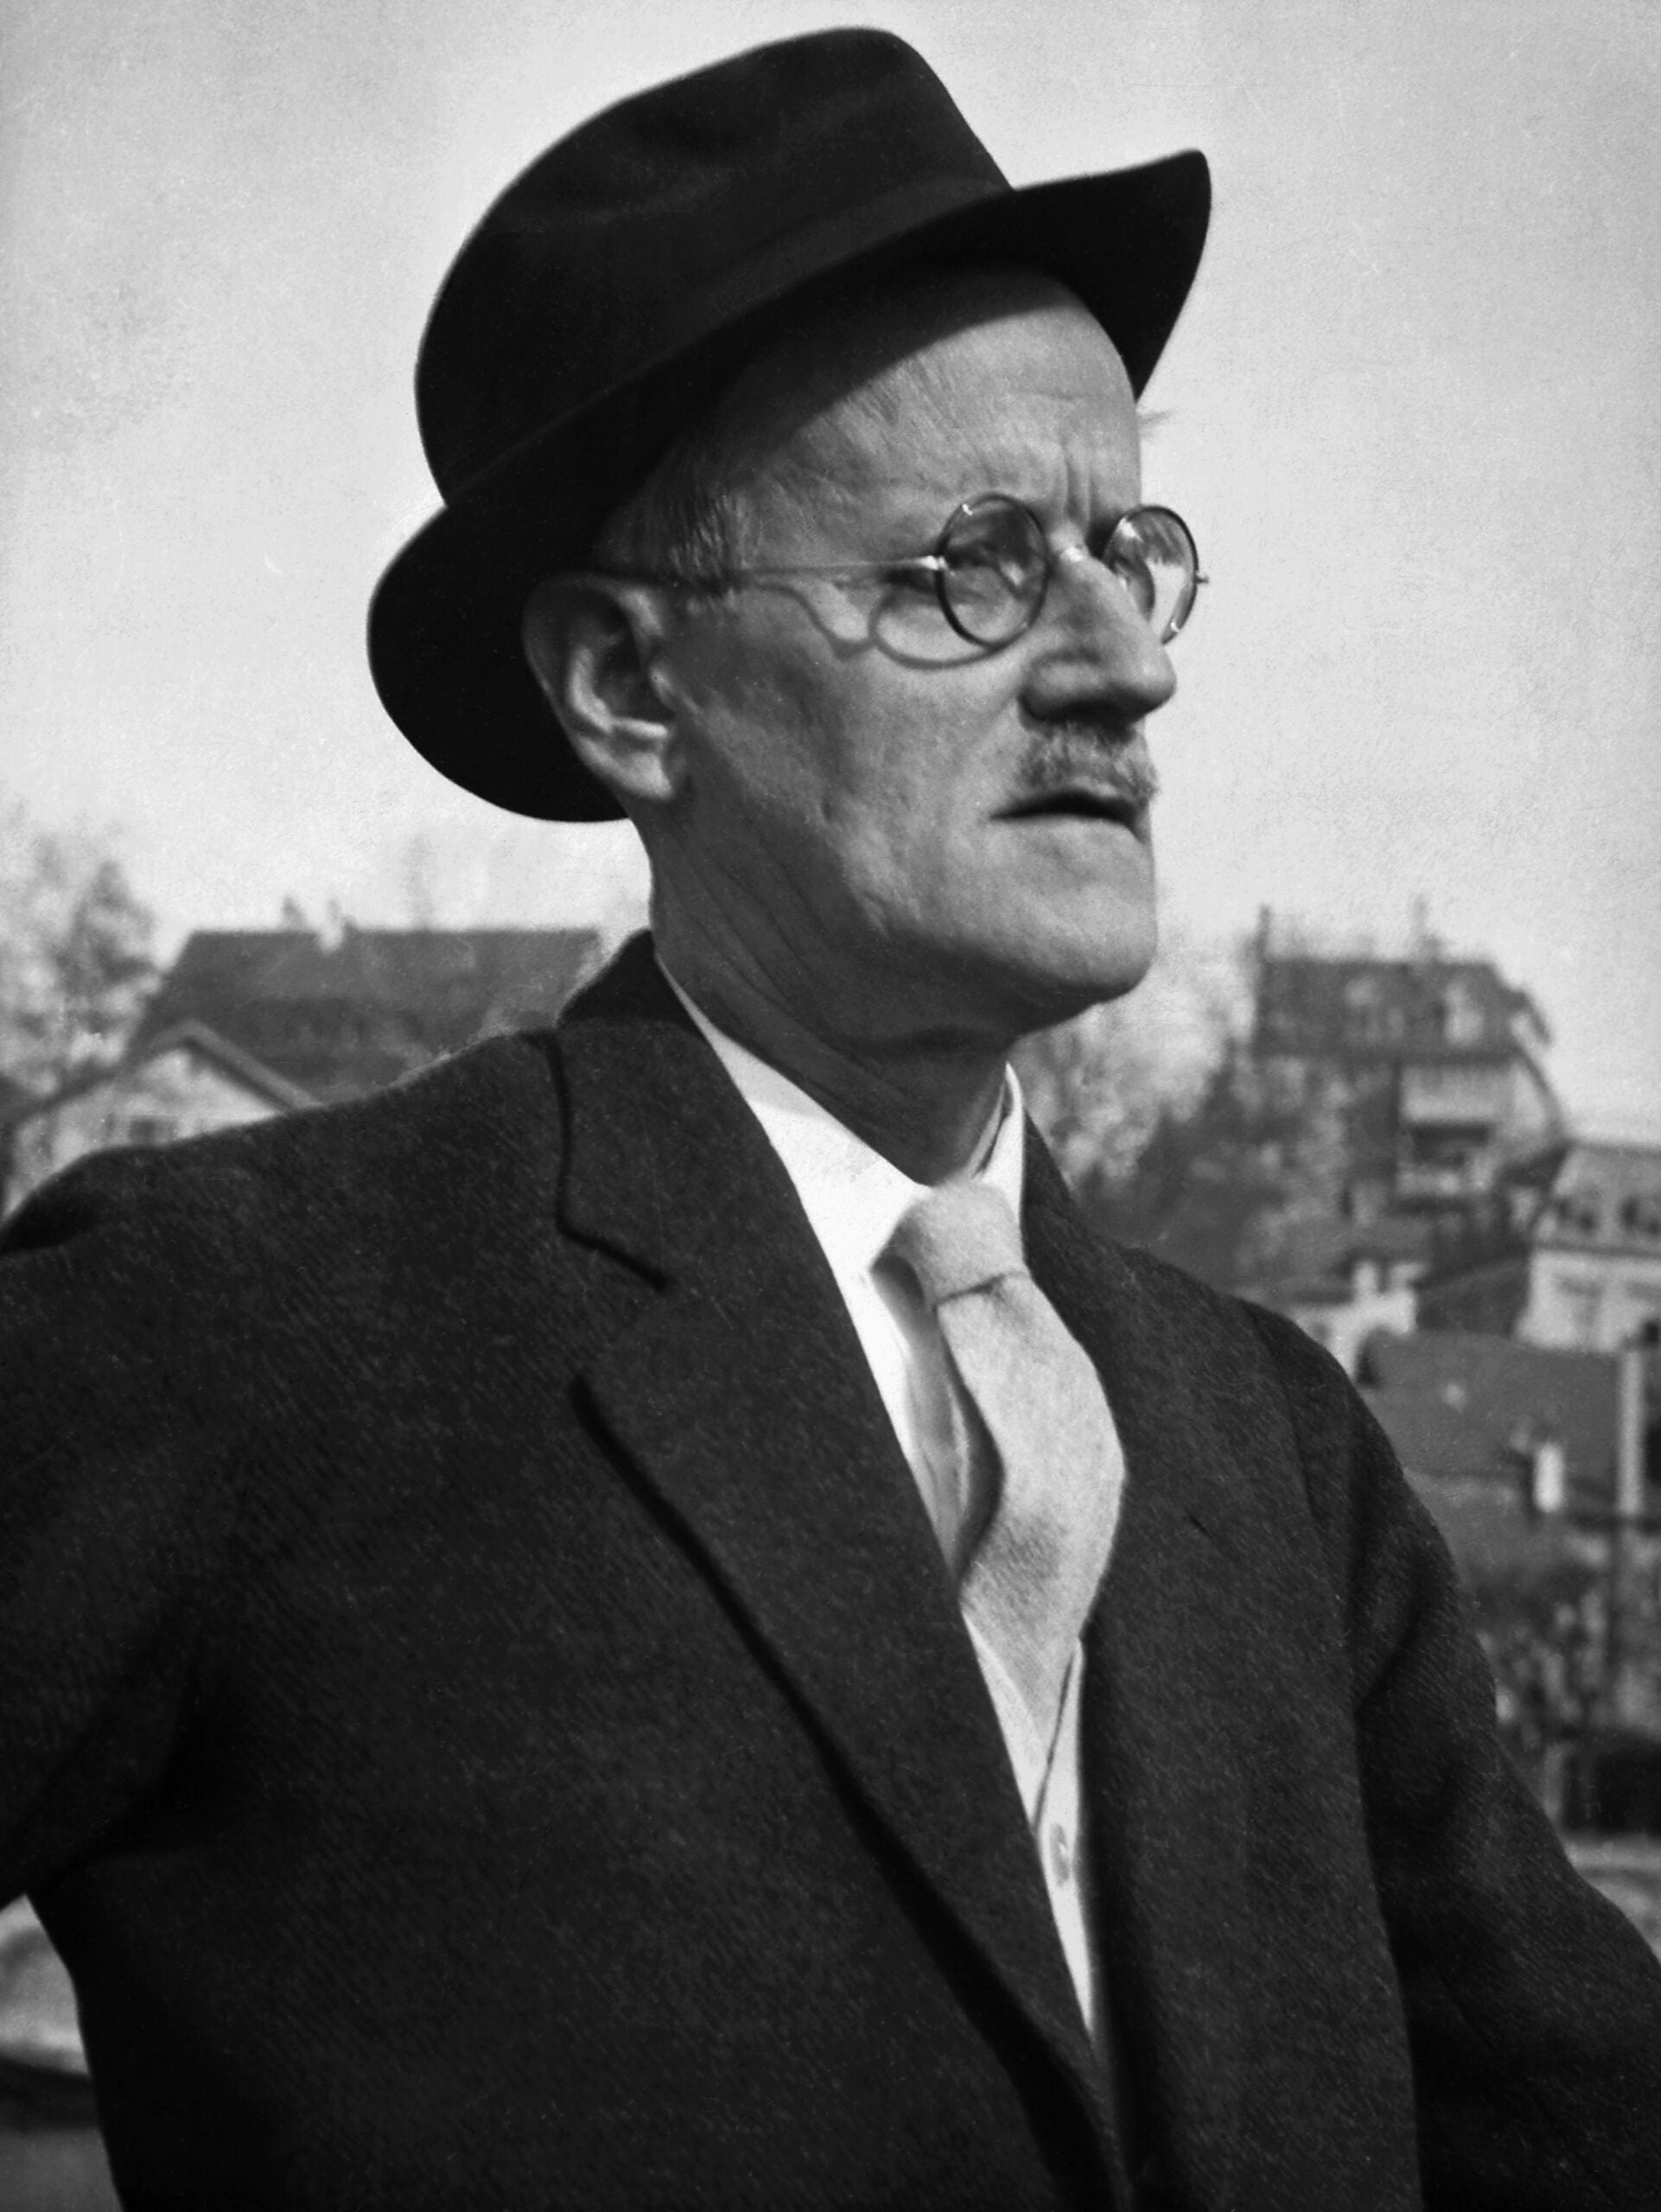 James Joyce (1882-1941) the Irish writer. His work includes, Dubliners (1914), Portrait of an Artist as a Young Man (1914) and Ulysses (1922). His contribution to the development of Twentieth Century literature was immense, particularly in terms of structure and style, with the 'stream of conciousness' technique. ca. 1938. (Photo by © Hulton-Deutsch Collection/CORBIS/Corbis via Getty Images)